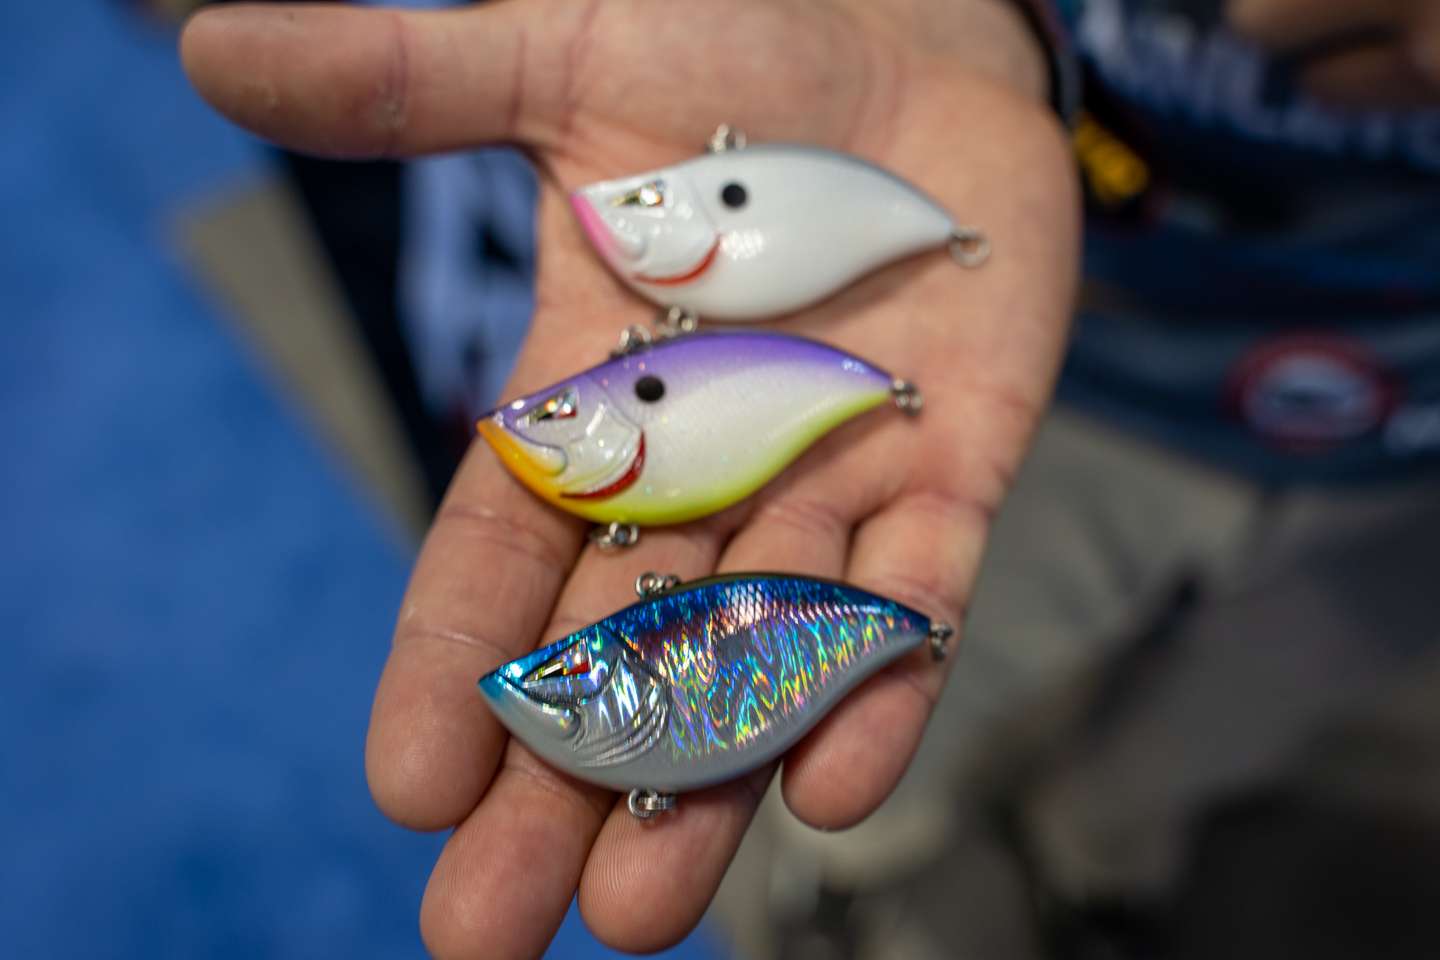 <b>Team Ark Elite Z-Series Lipless Crankbait (new colors)</b><br>
Another product that is not new to the market, but a few of the new colors of this lipless crankbait caught my eye as I walked by. 